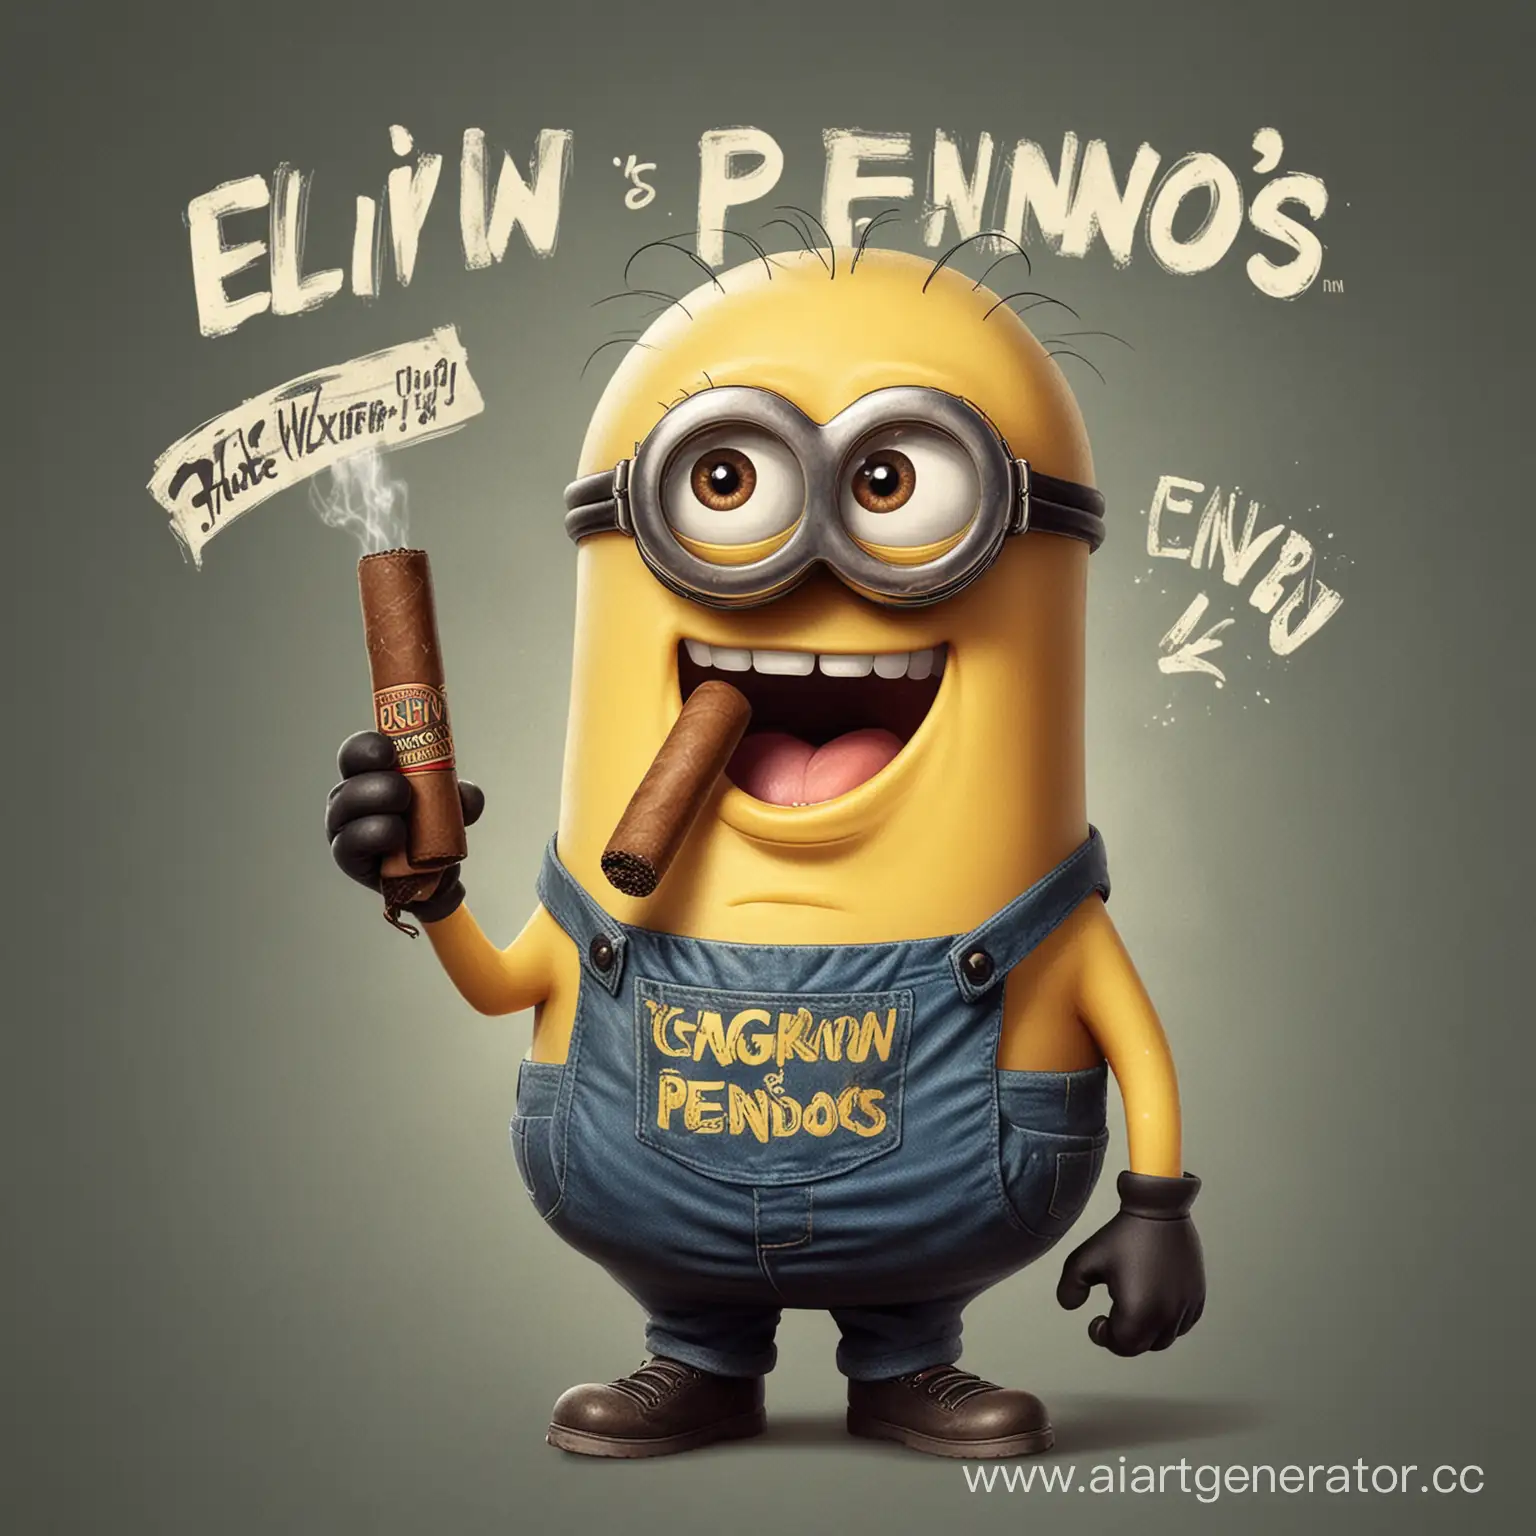 A pumped-up minion with a cigar in his mouth and the inscription on an elvin pendos T-shirt knocks out SpongeBob